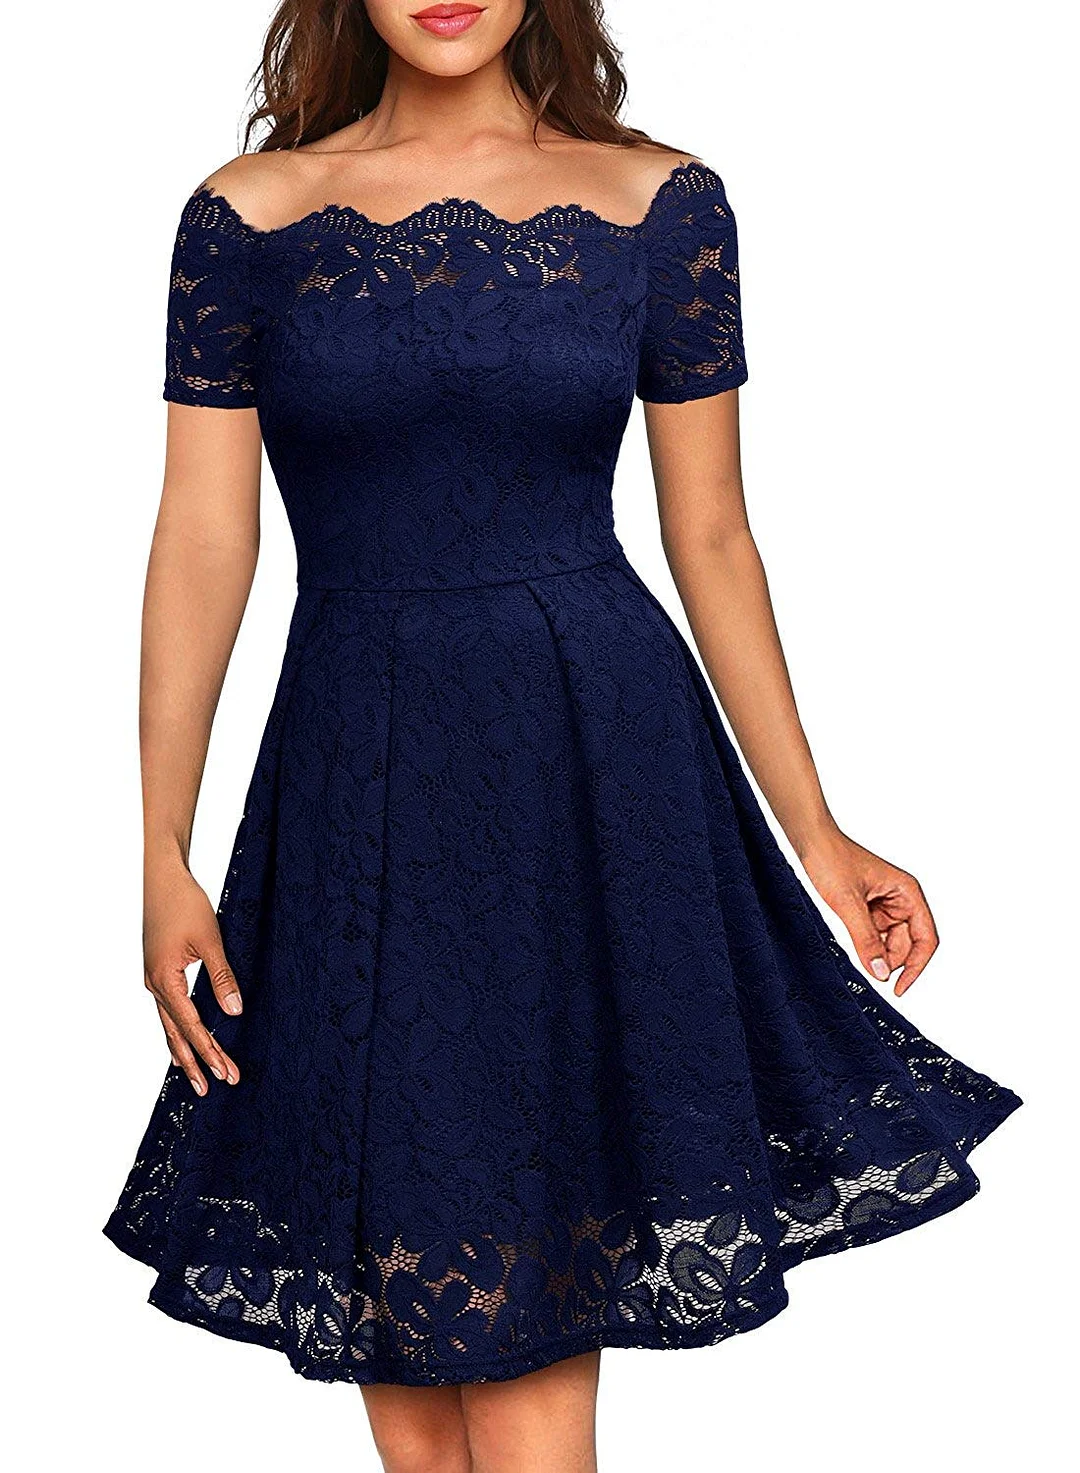 Party Swing Dress Women's Vintage Floral Lace Short Sleeve Boat Neck Cocktail Party Swing Dress